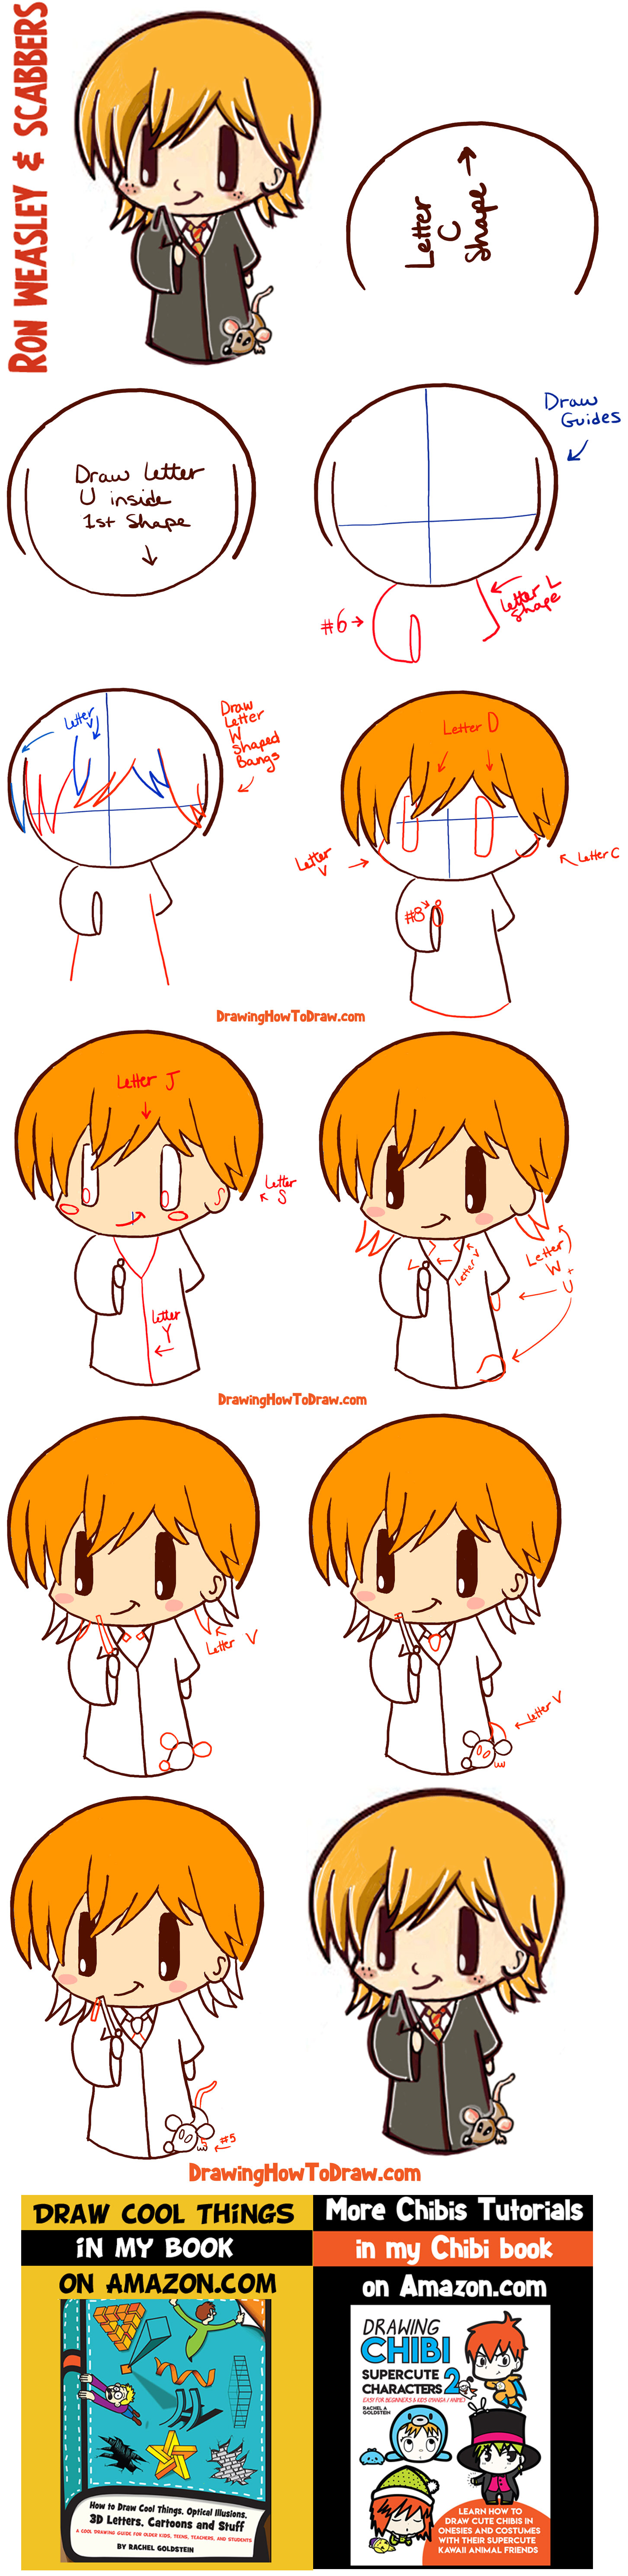 How to Draw Cute Chibi Ron Weasley and Scabbers the Rat from Harry Potter